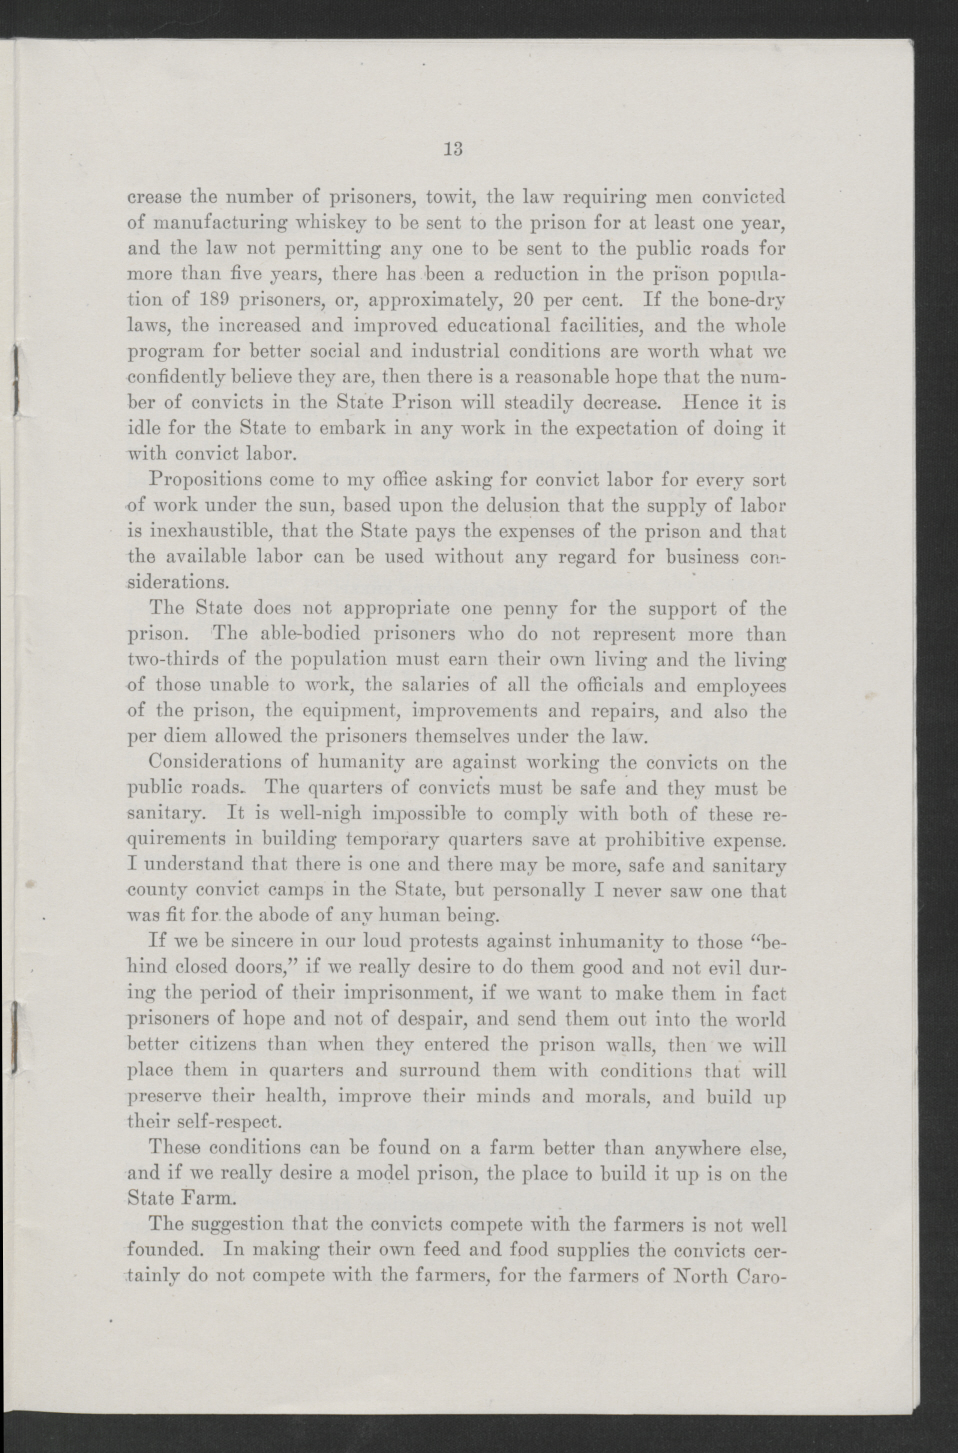 Biennial Message of Governor Thomas W. Bickett to the General Assembly, January 9, 1919, page 11